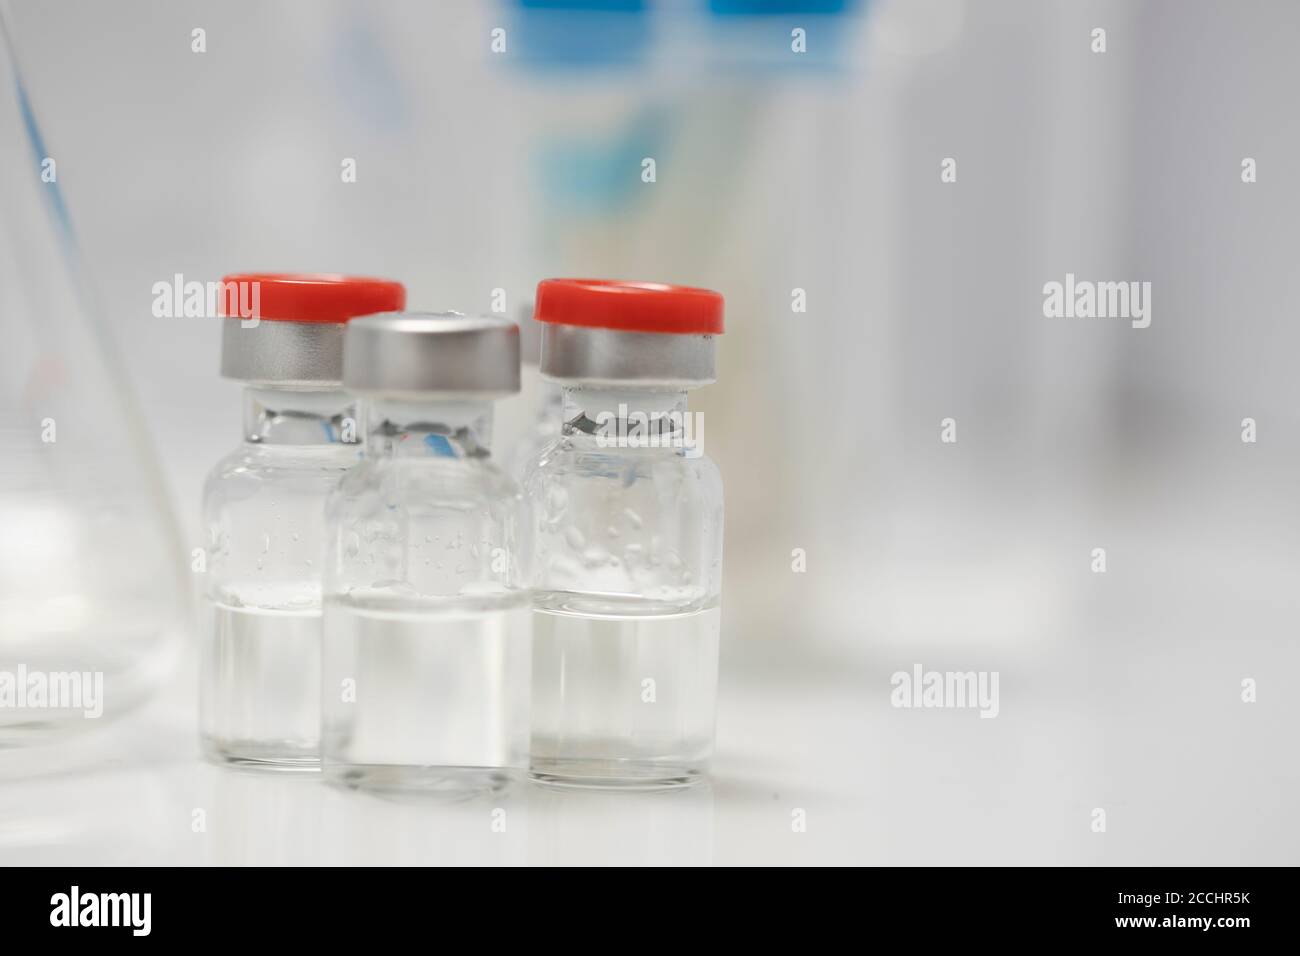 Medical Series, injection vial bottles stock photo, Pandemic series Stock Photo